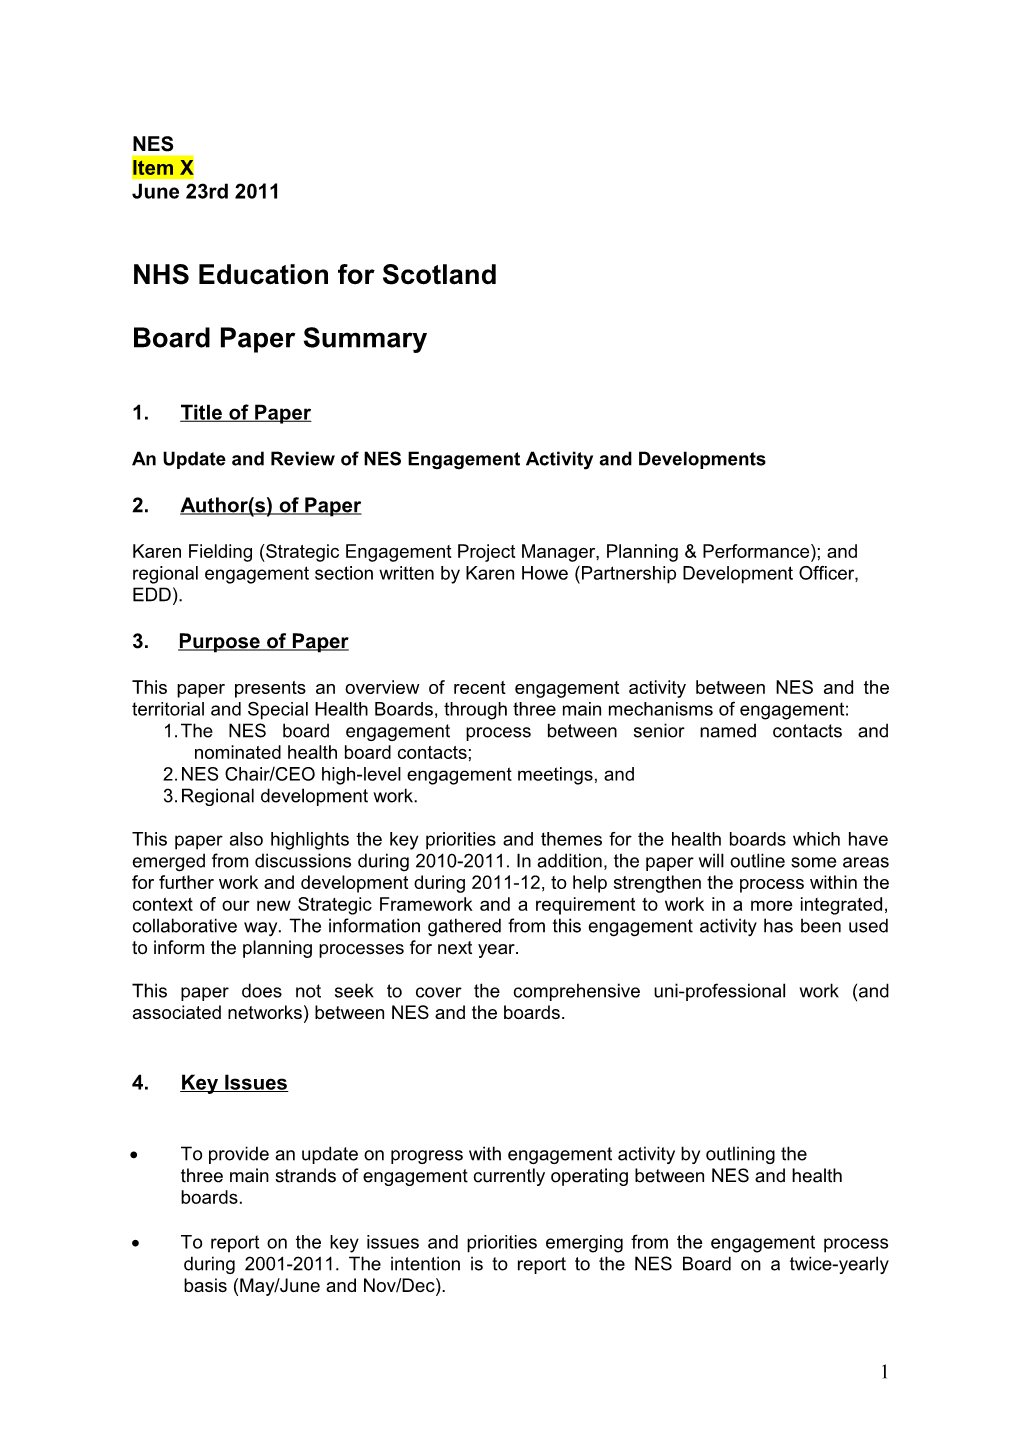 NHS Education for Scotland s5